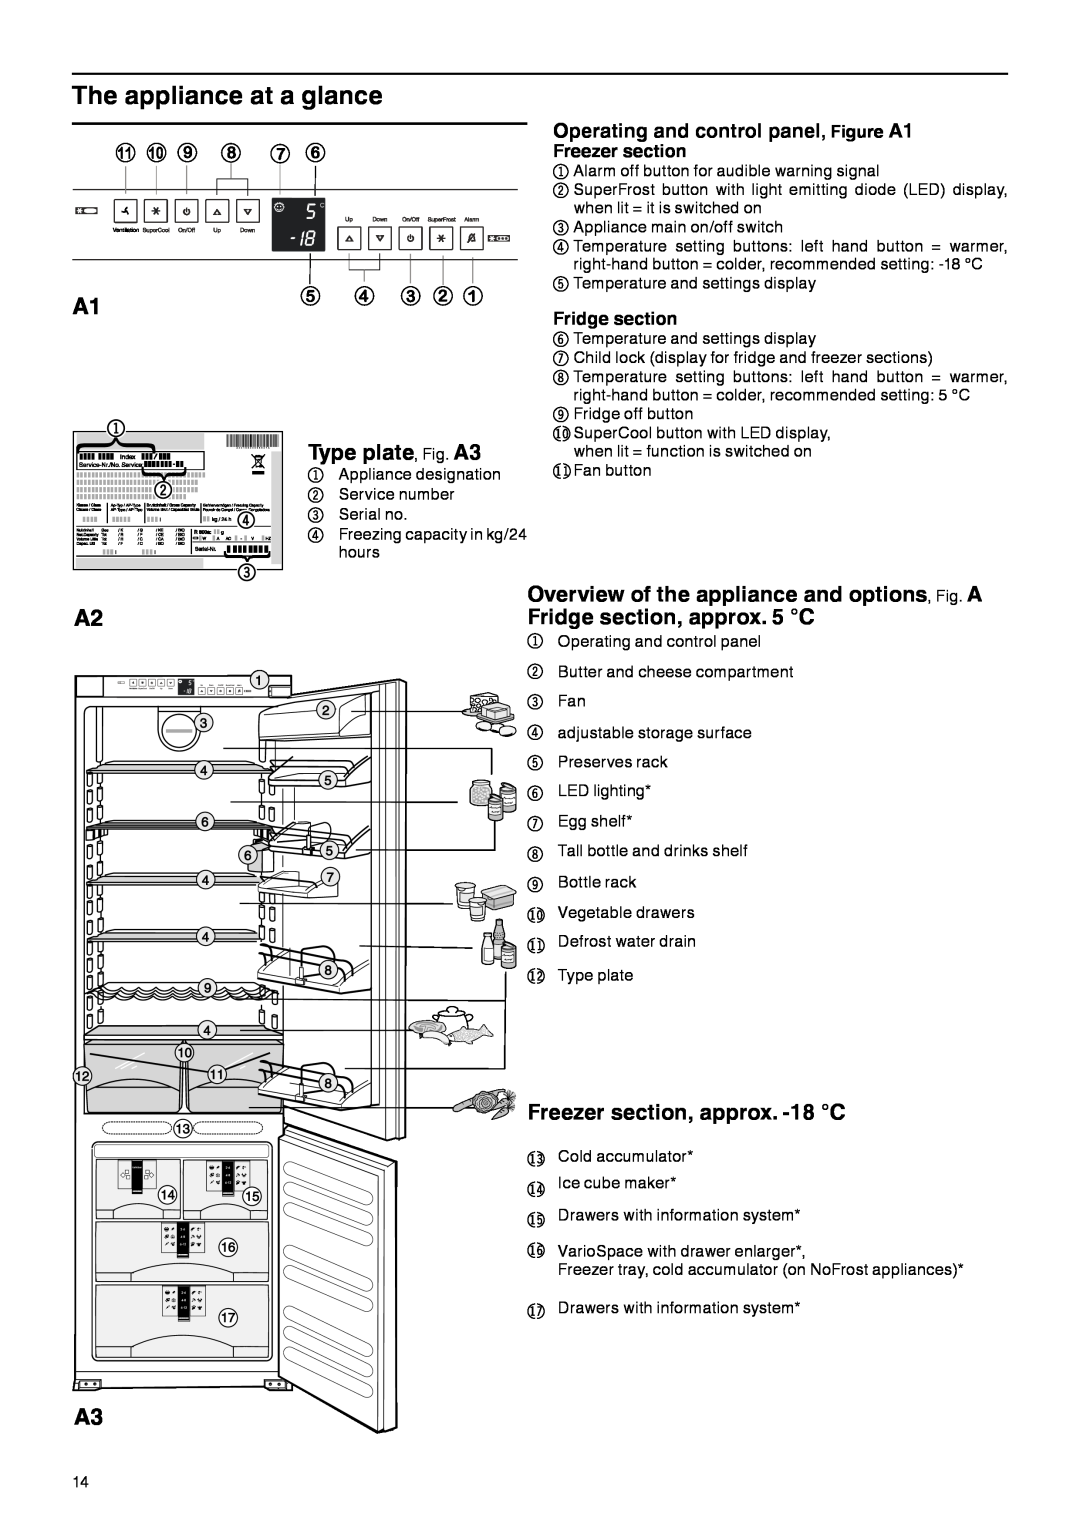 Liebherr 7082 532-00 The appliance at a glance, Type plate, Fig. A3, Overview of the appliance and options, Fig. A 